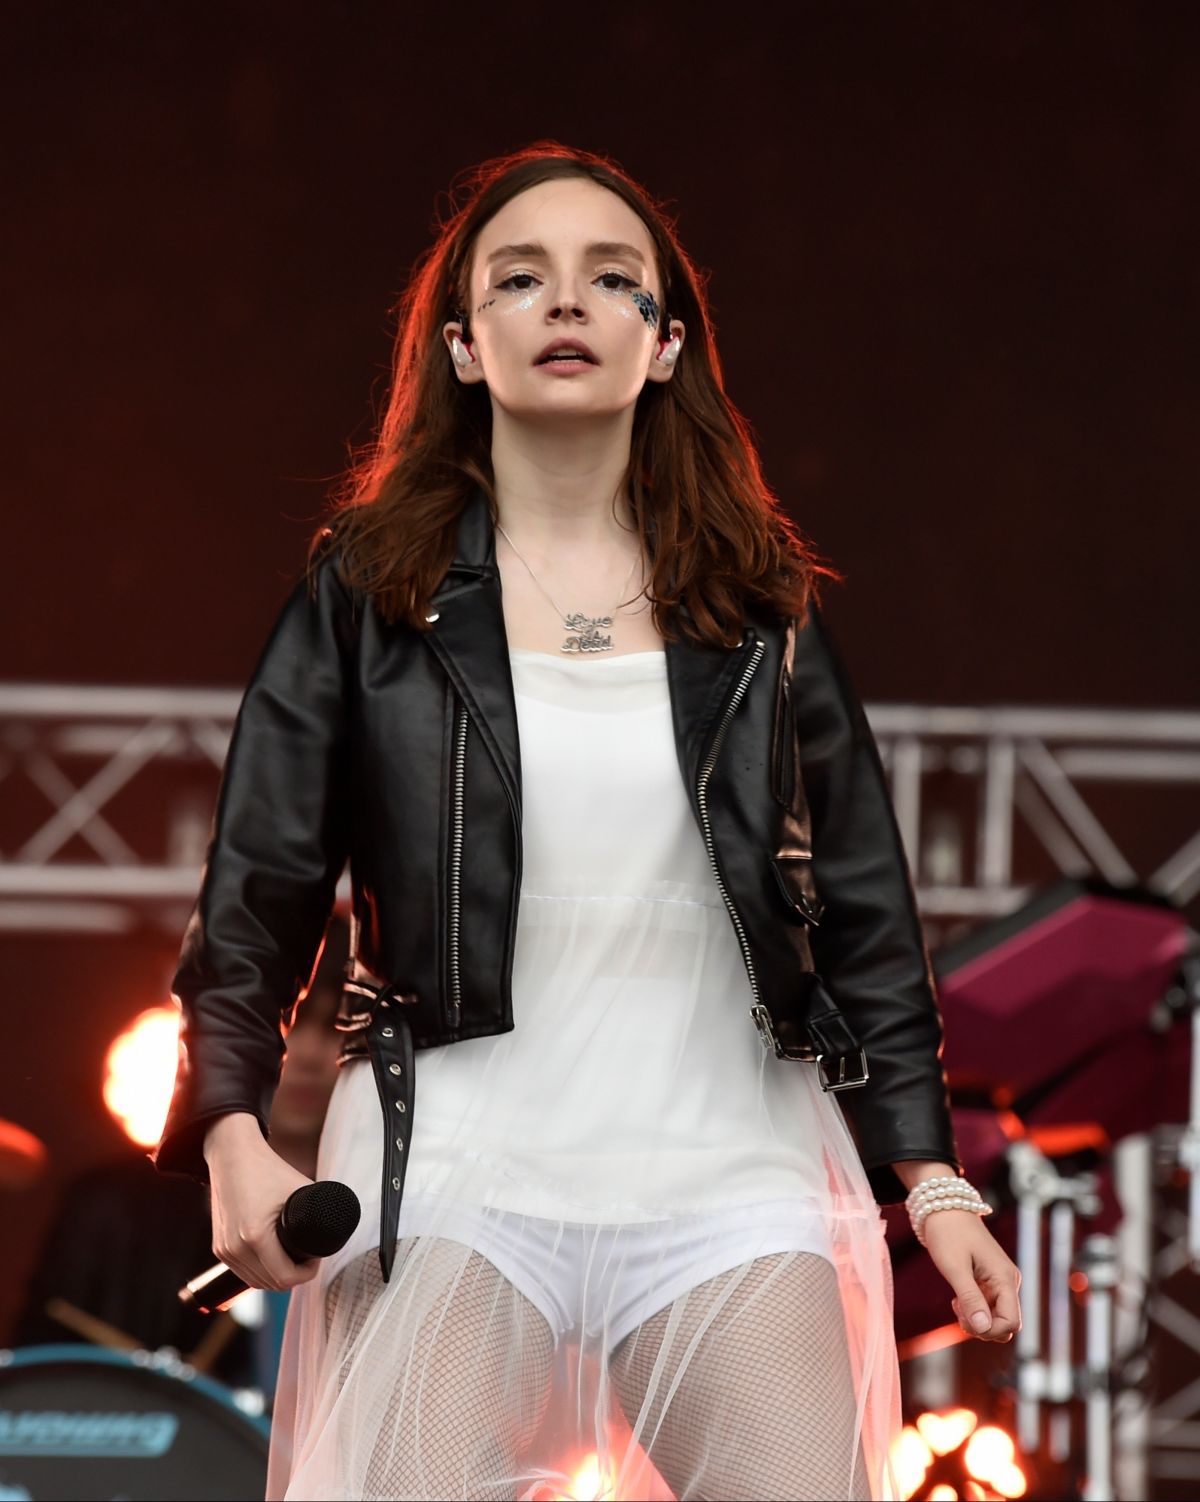 LAUREN MAYBERRY (CHVRCHES) at Parklife Festival at Heaton Park in Manchester 06/10 ...1200 x 1502